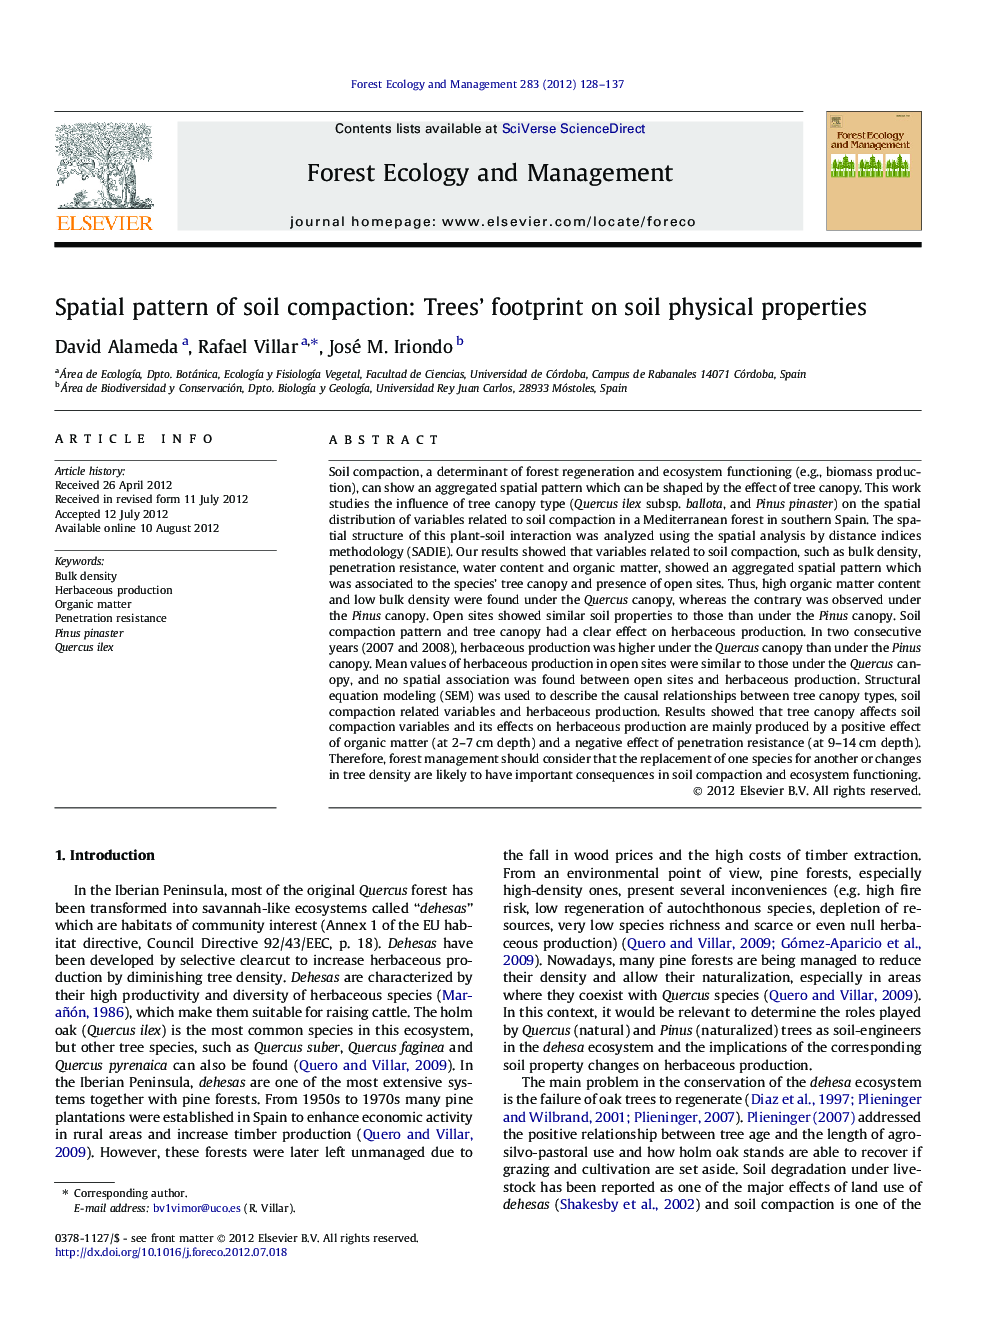 Spatial pattern of soil compaction: Trees’ footprint on soil physical properties